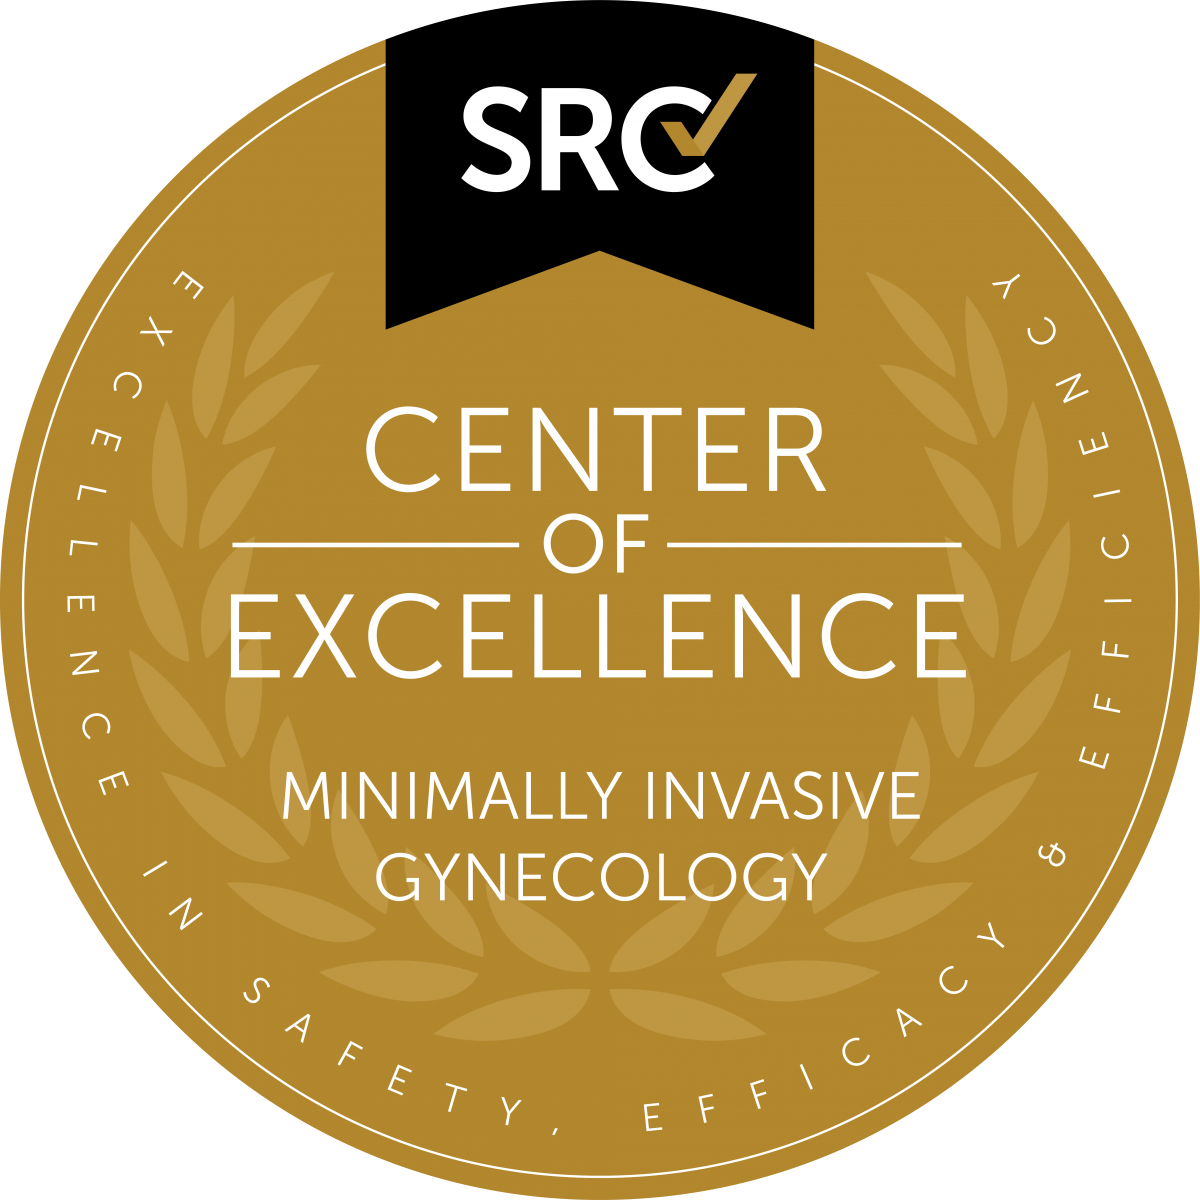 Center of Excellence of Minimally Invasive Gynecology 